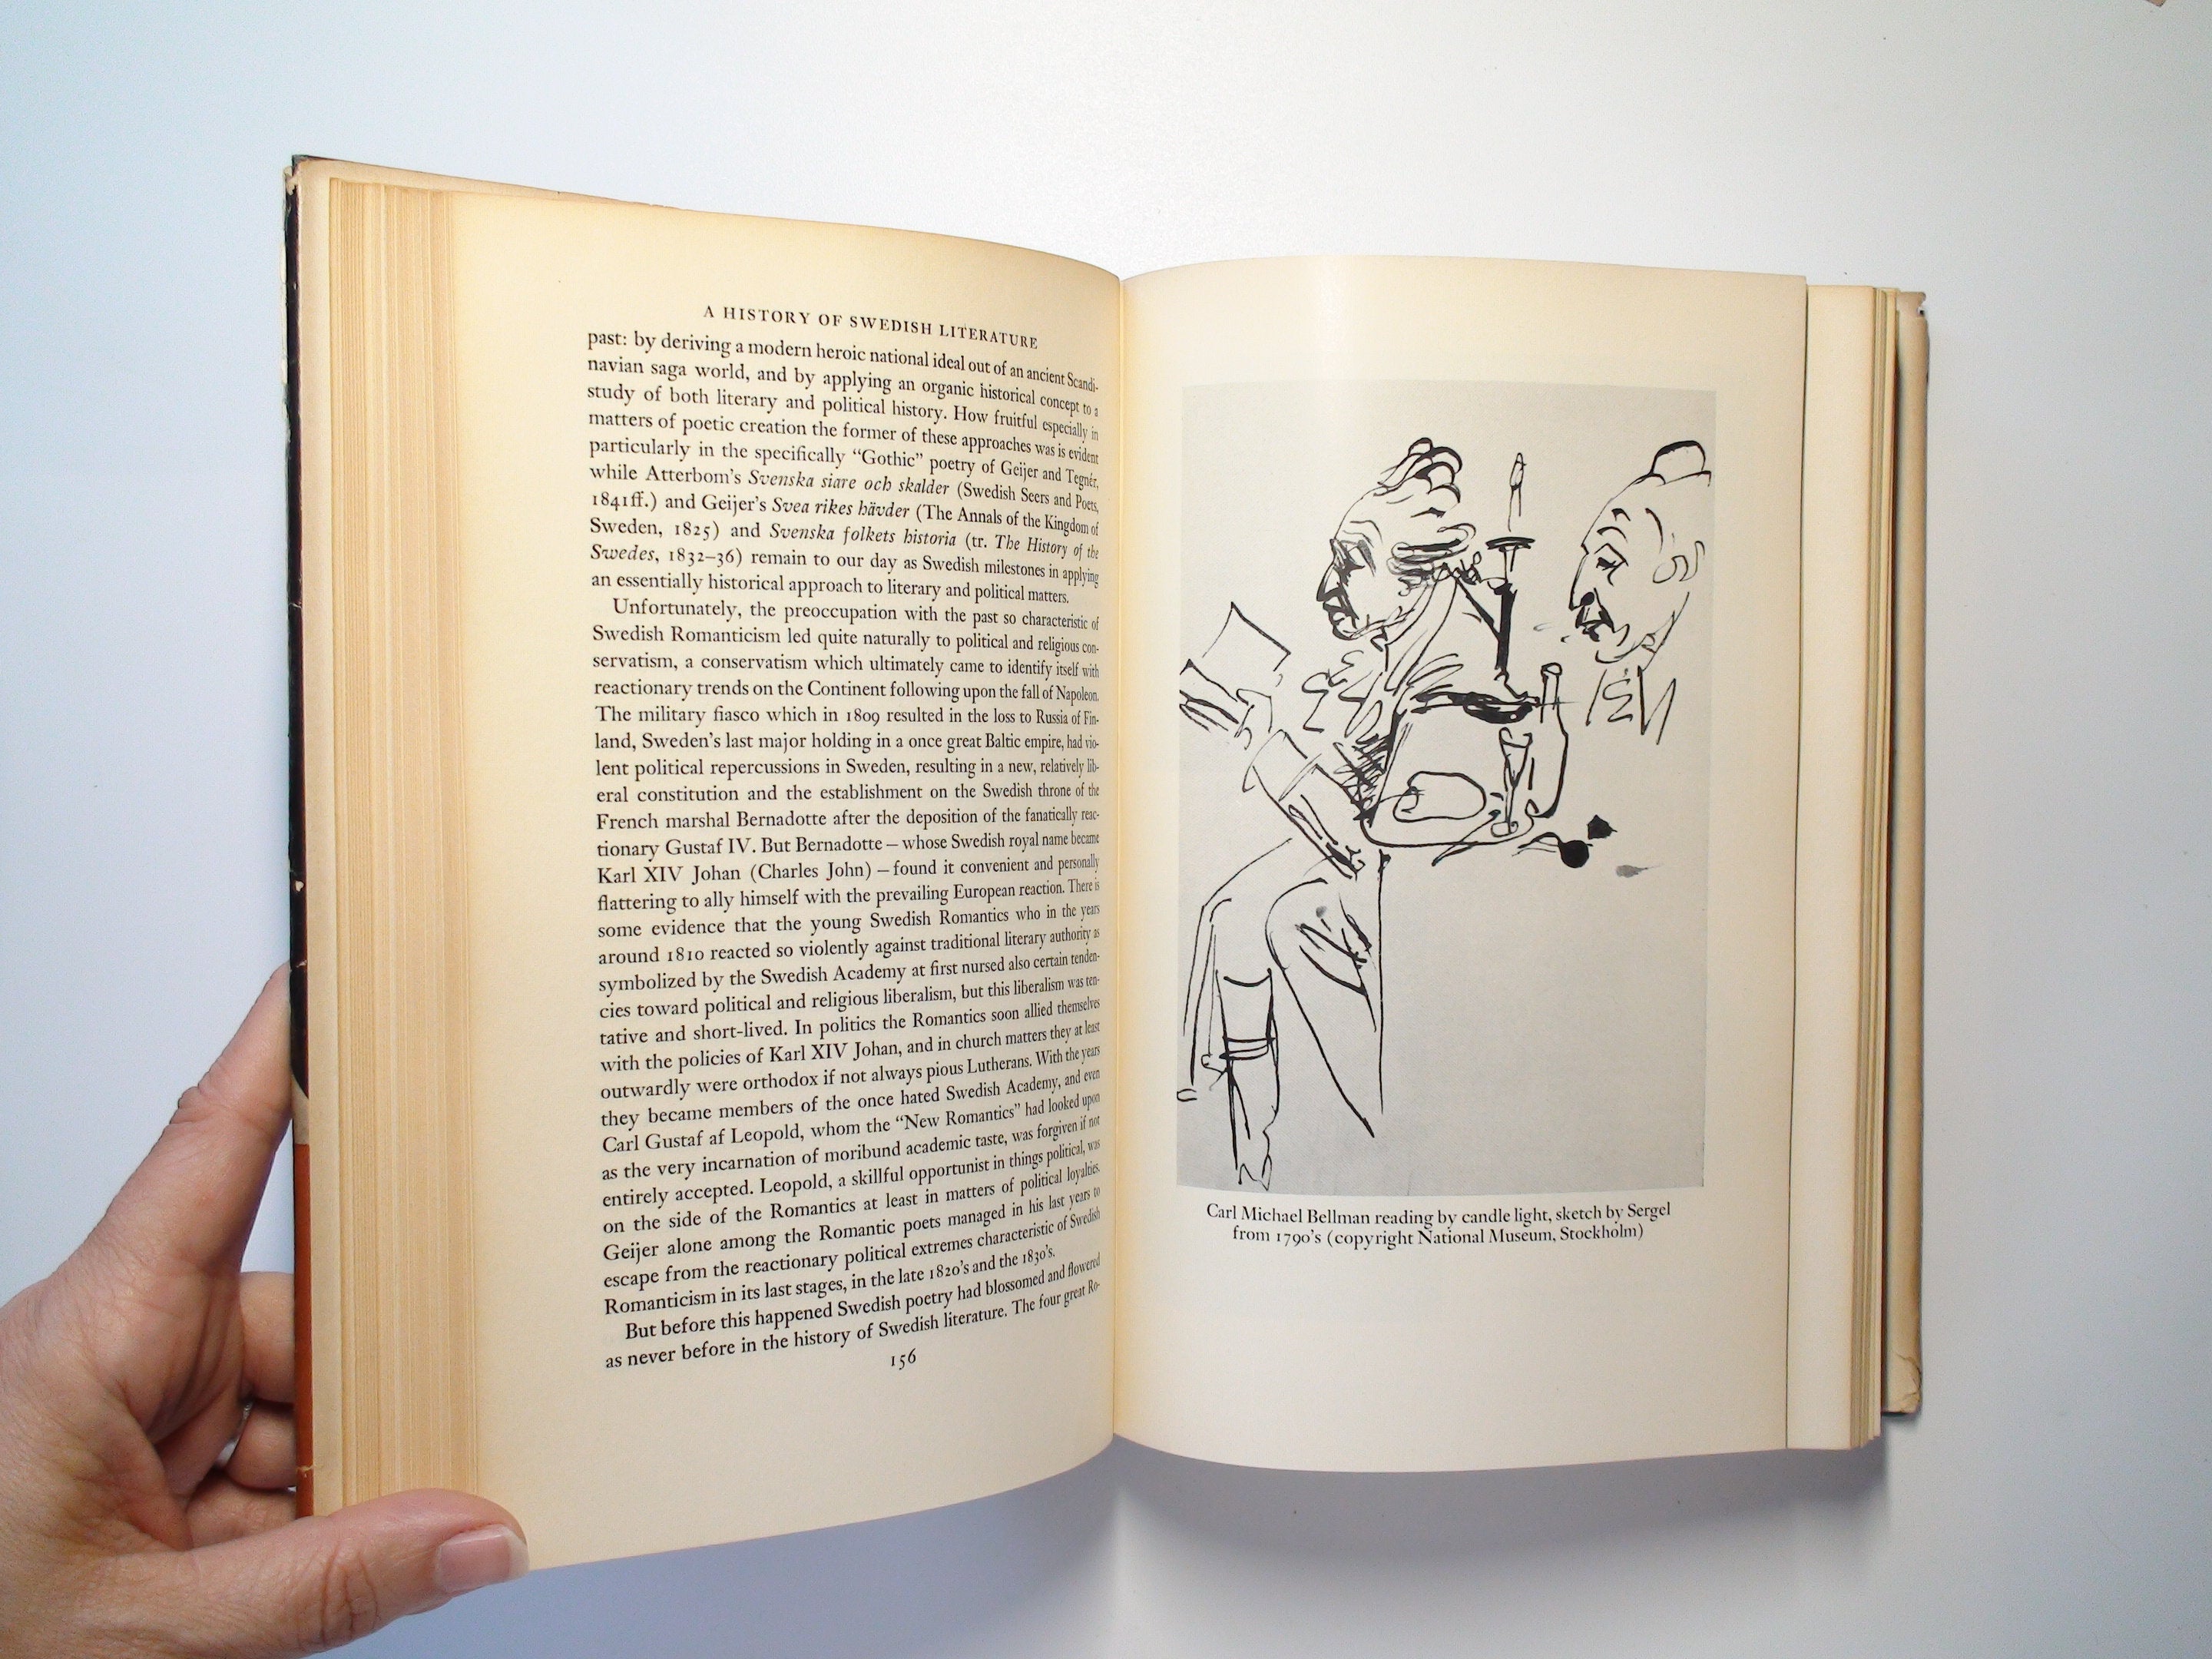 A History of Swedish Literature, by Alrik Gustafson, Illustrated, 1961